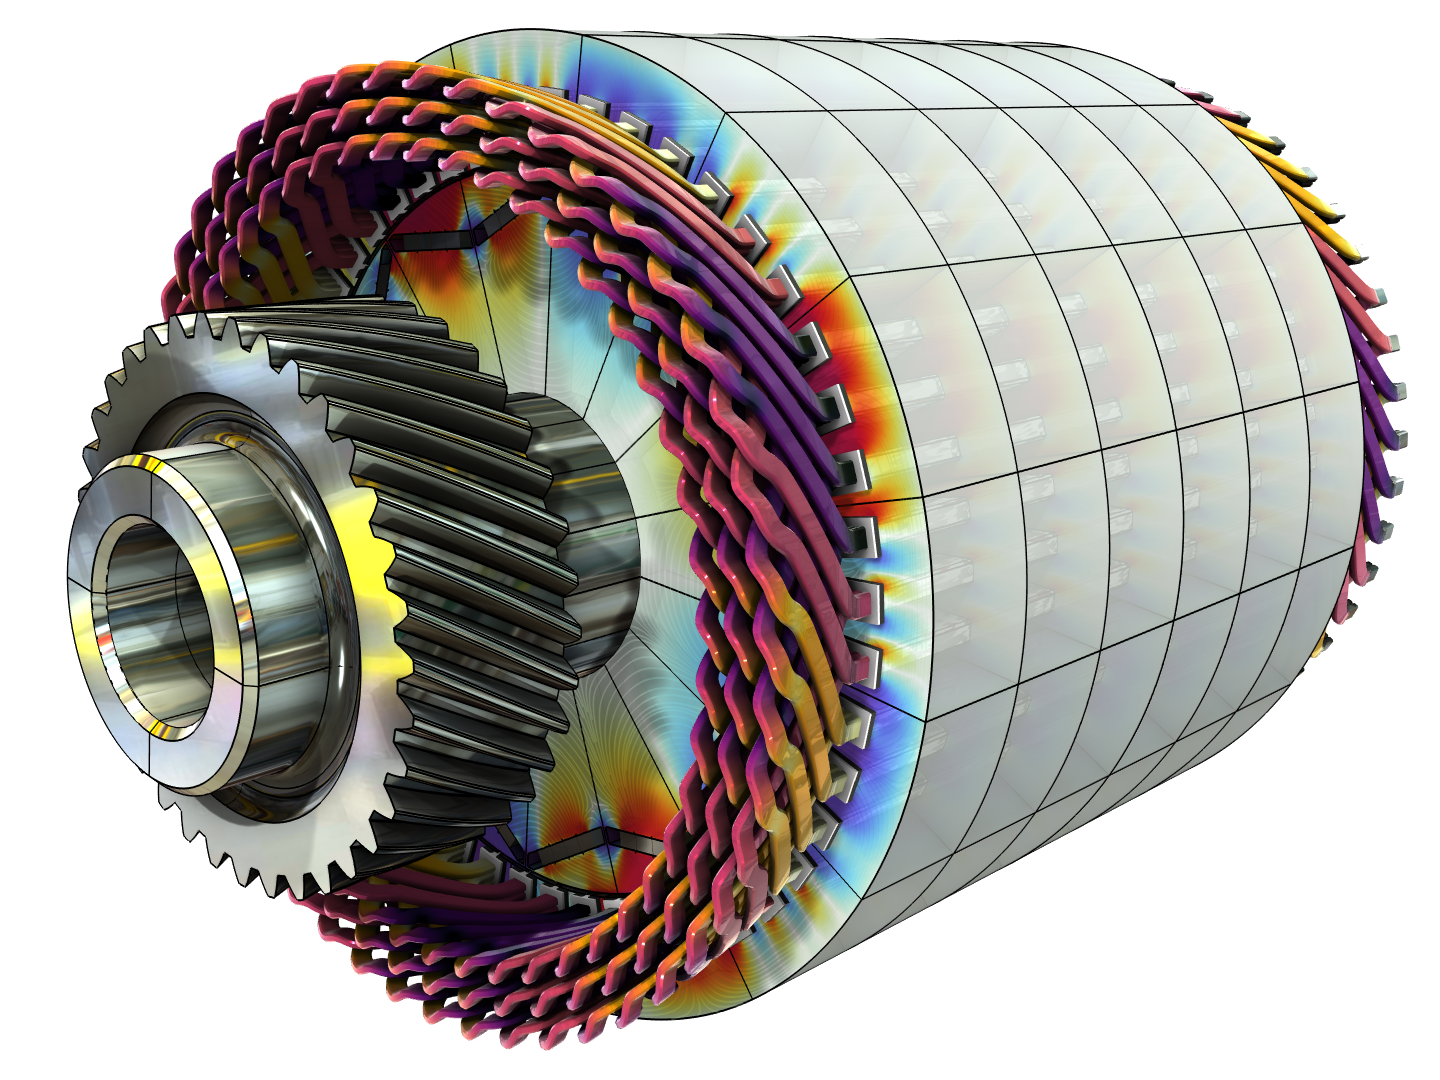 A simulated visualization of an electric motor.